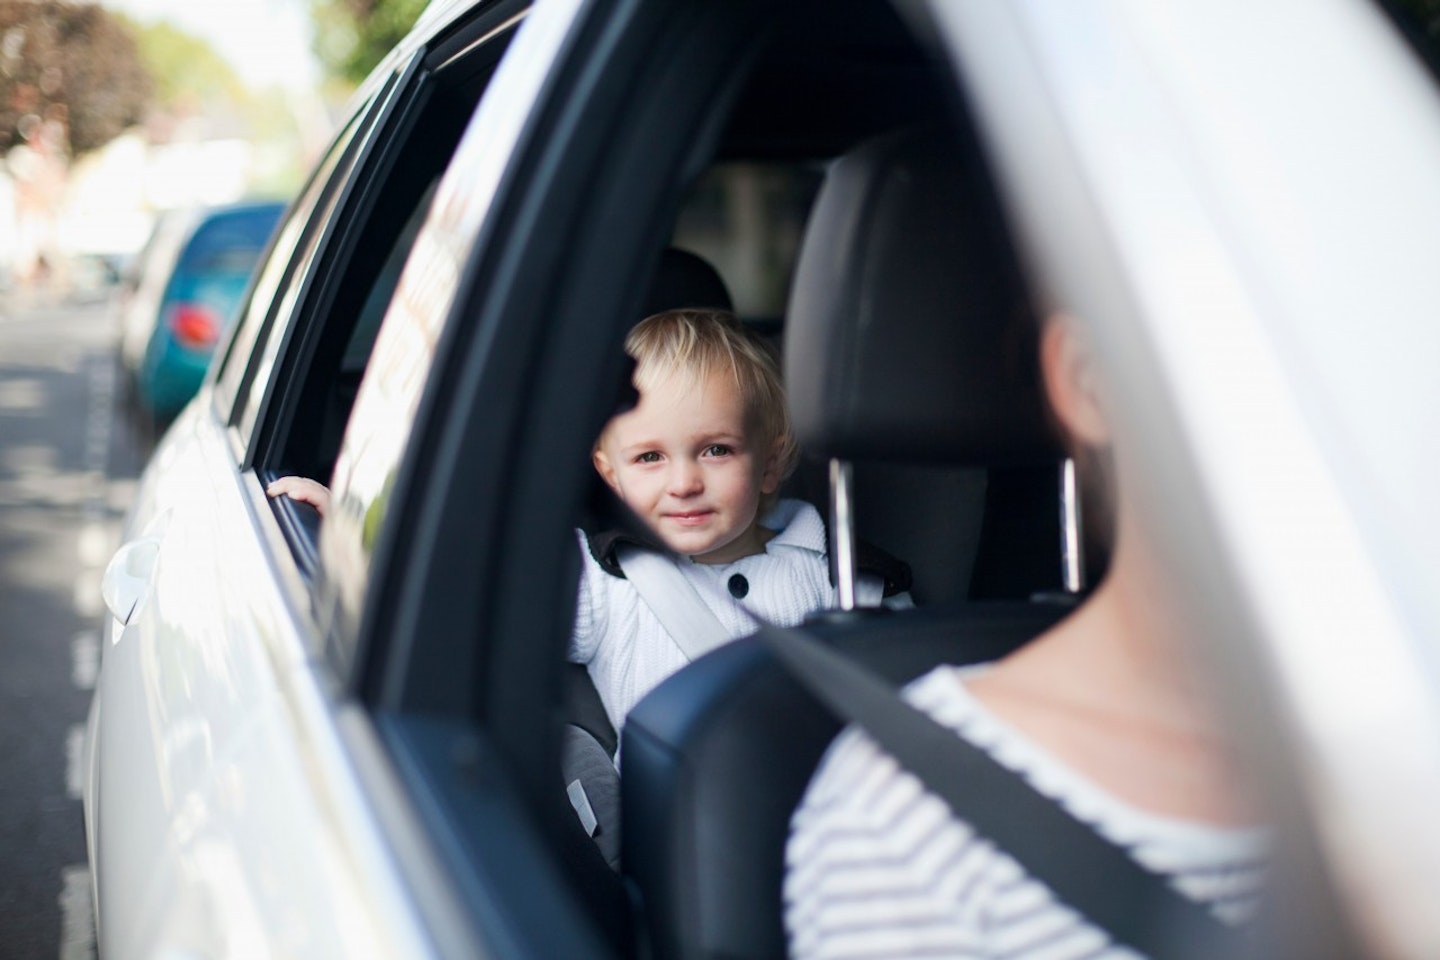 Any of these sound familiar during a car journey with your child?